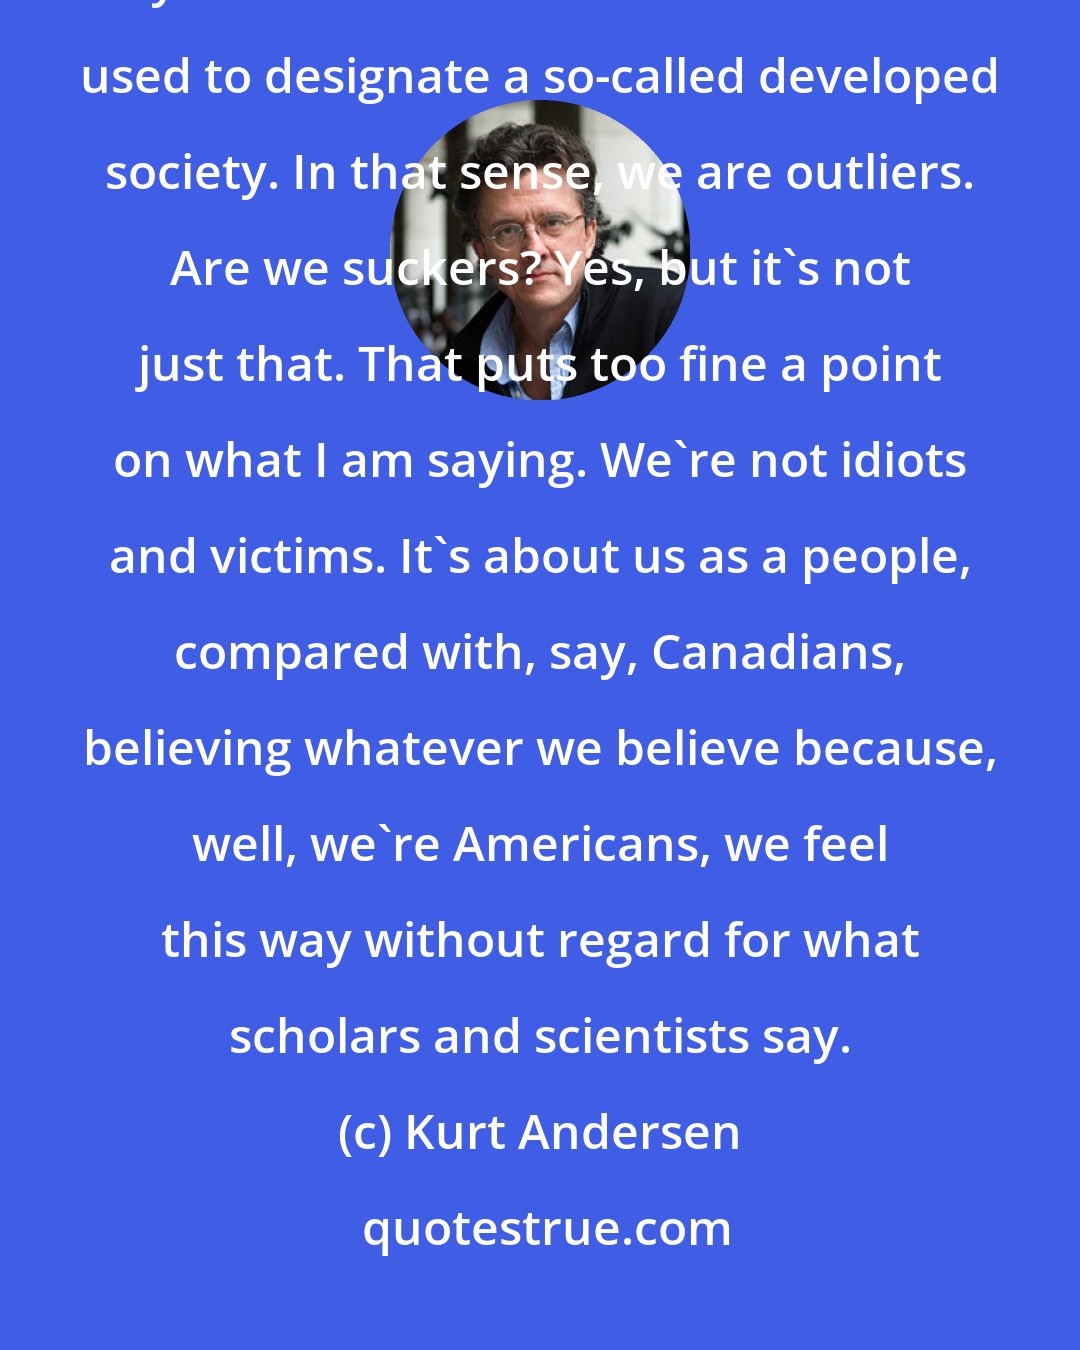 Kurt Andersen: I'm comparing Americans to international peers in terms of GDP, educational system - the sort of benchmarks we used to designate a so-called developed society. In that sense, we are outliers. Are we suckers? Yes, but it's not just that. That puts too fine a point on what I am saying. We're not idiots and victims. It's about us as a people, compared with, say, Canadians, believing whatever we believe because, well, we're Americans, we feel this way without regard for what scholars and scientists say.